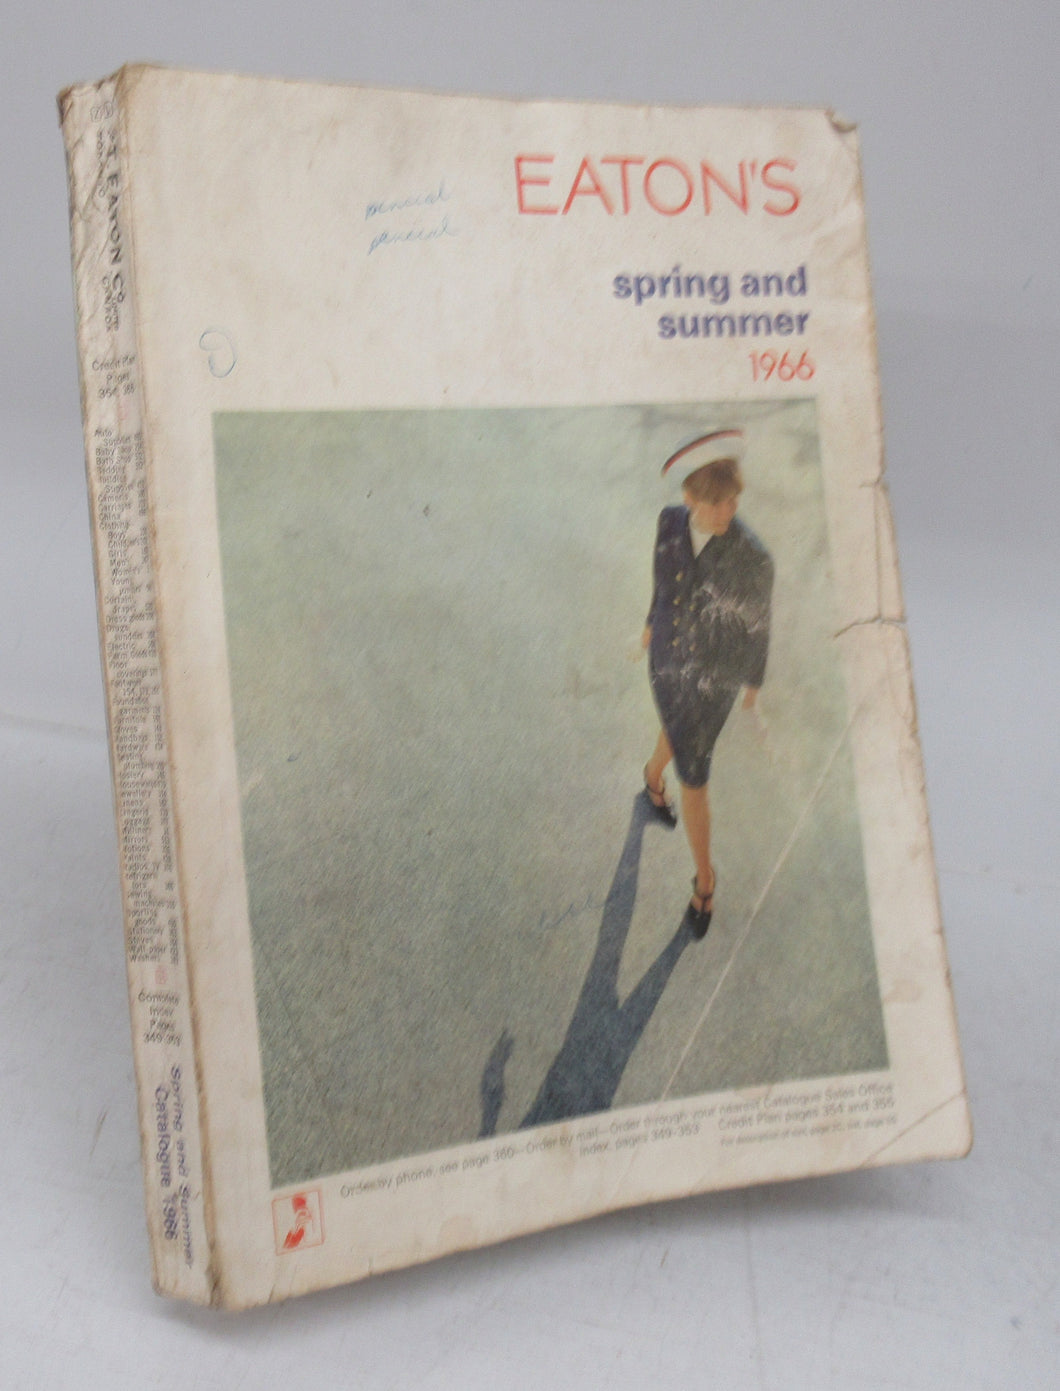 Eaton's spring and summer 1966